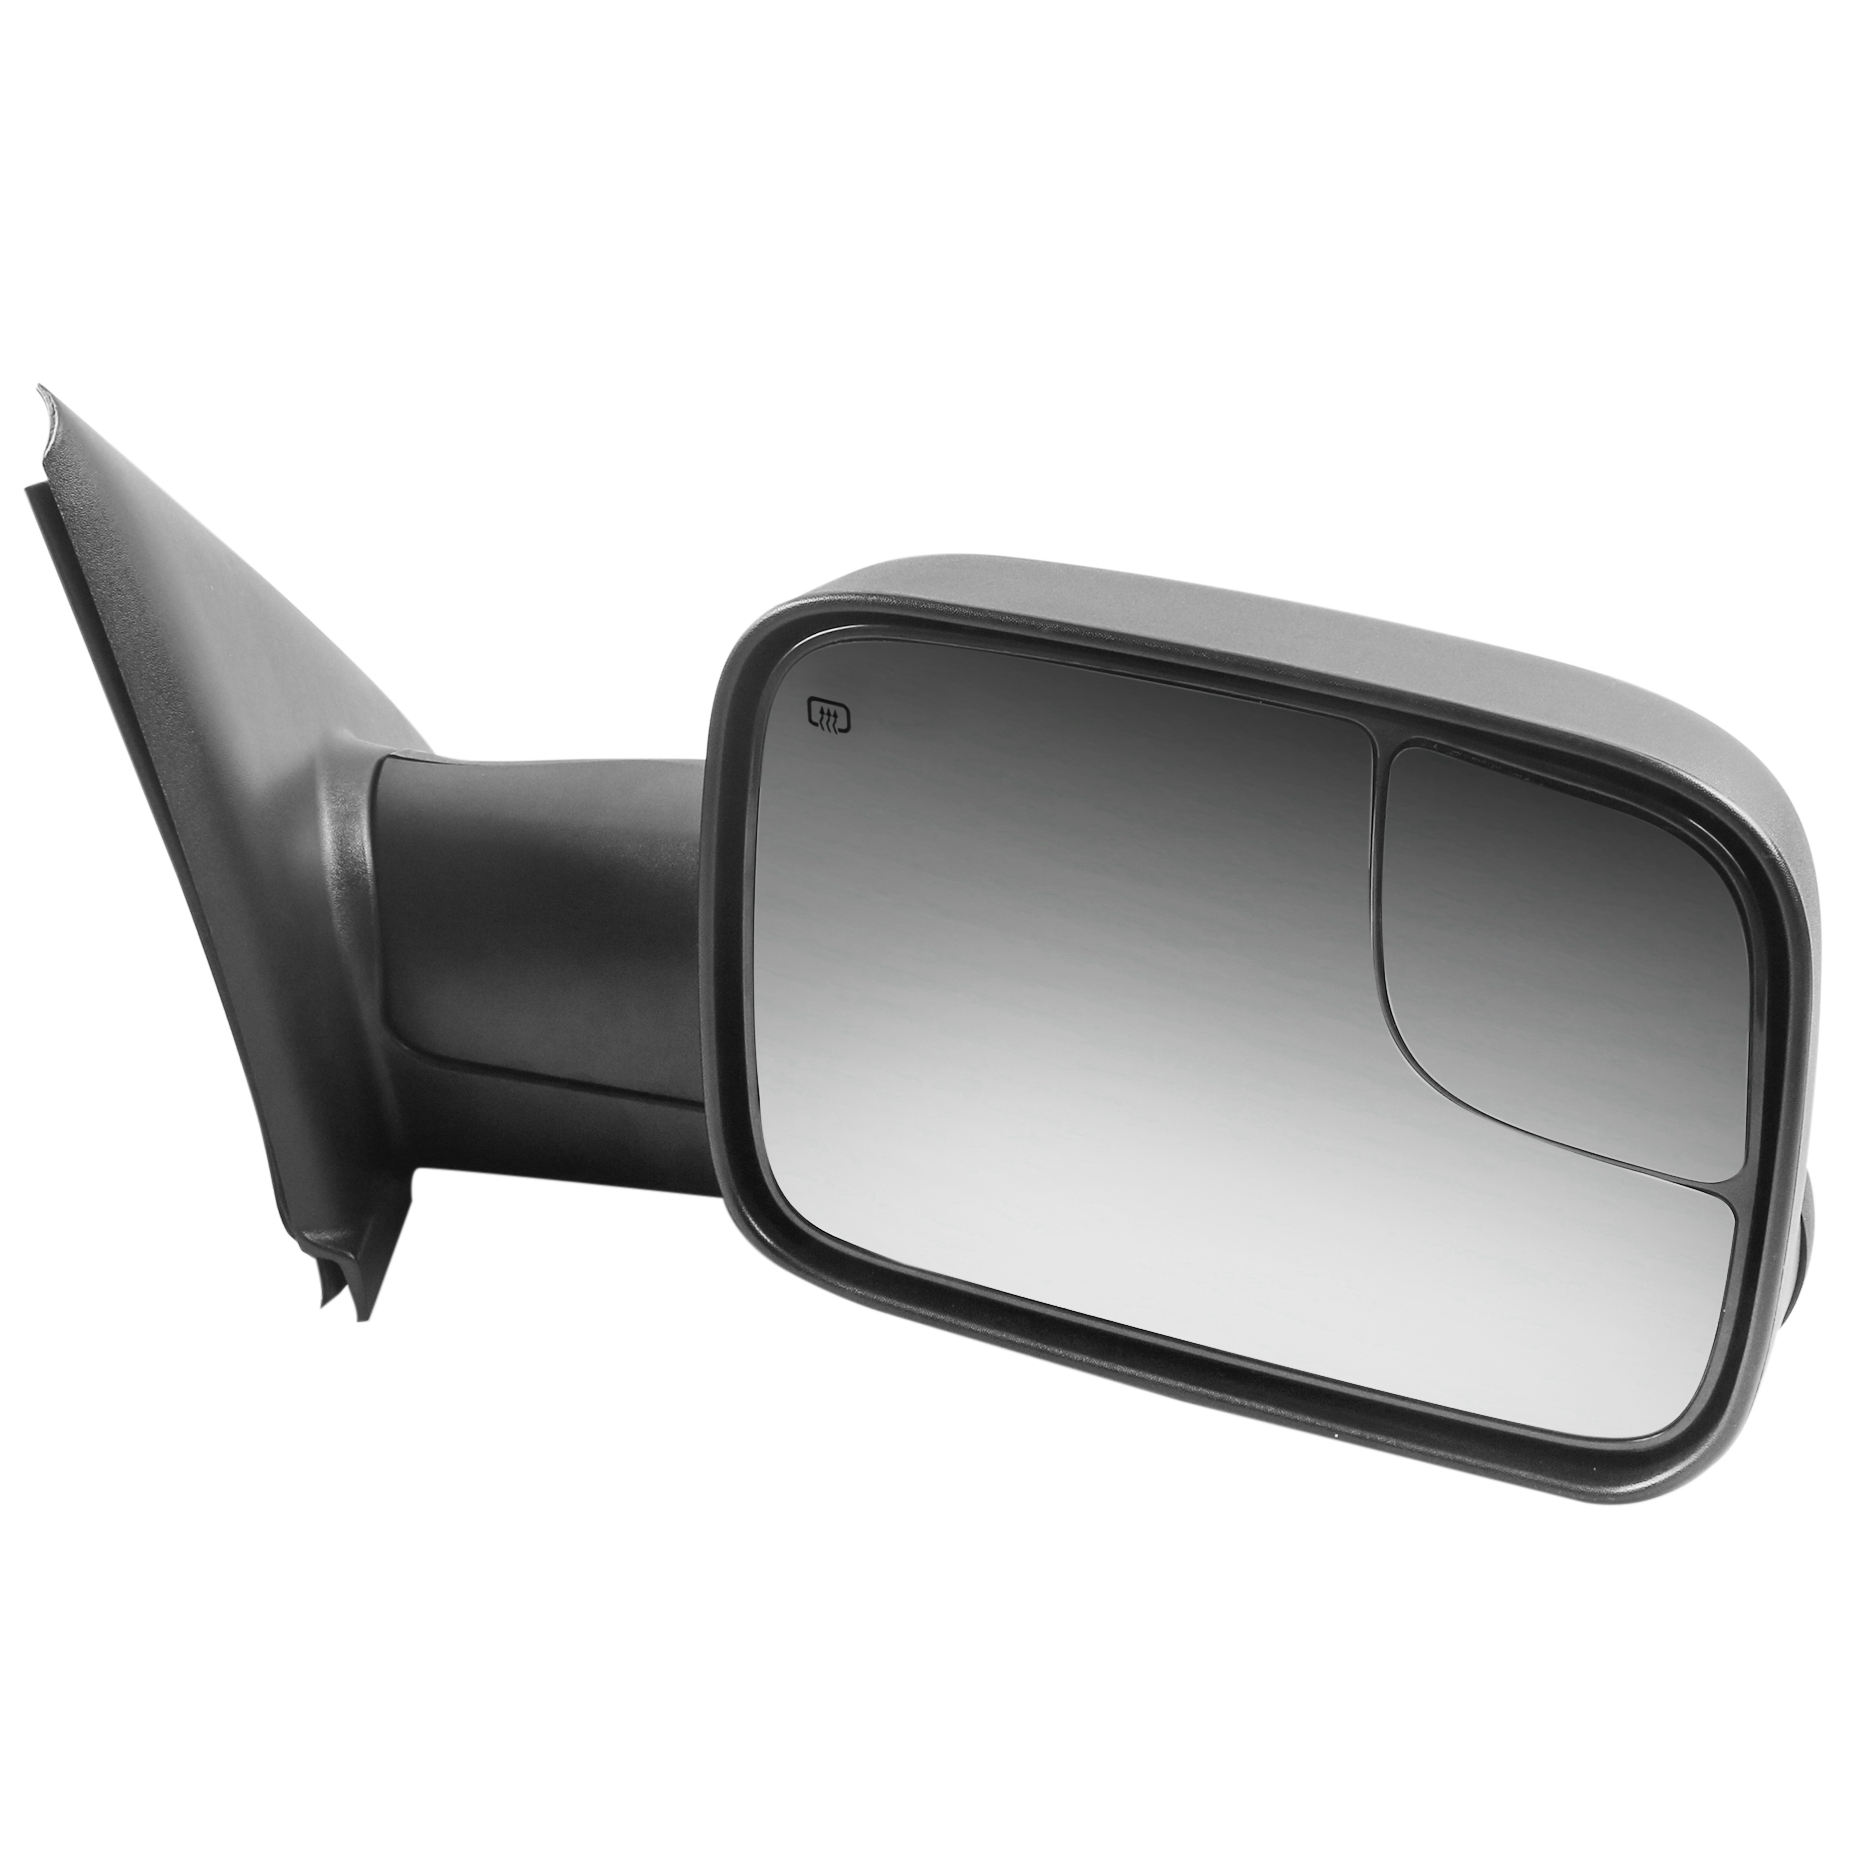 Passenger Side Power Heated Tow Mirror for 03-08 Dodge Ram 1500-3500 Dual Glass | eBay 2008 Dodge Ram 1500 Passenger Side Mirror